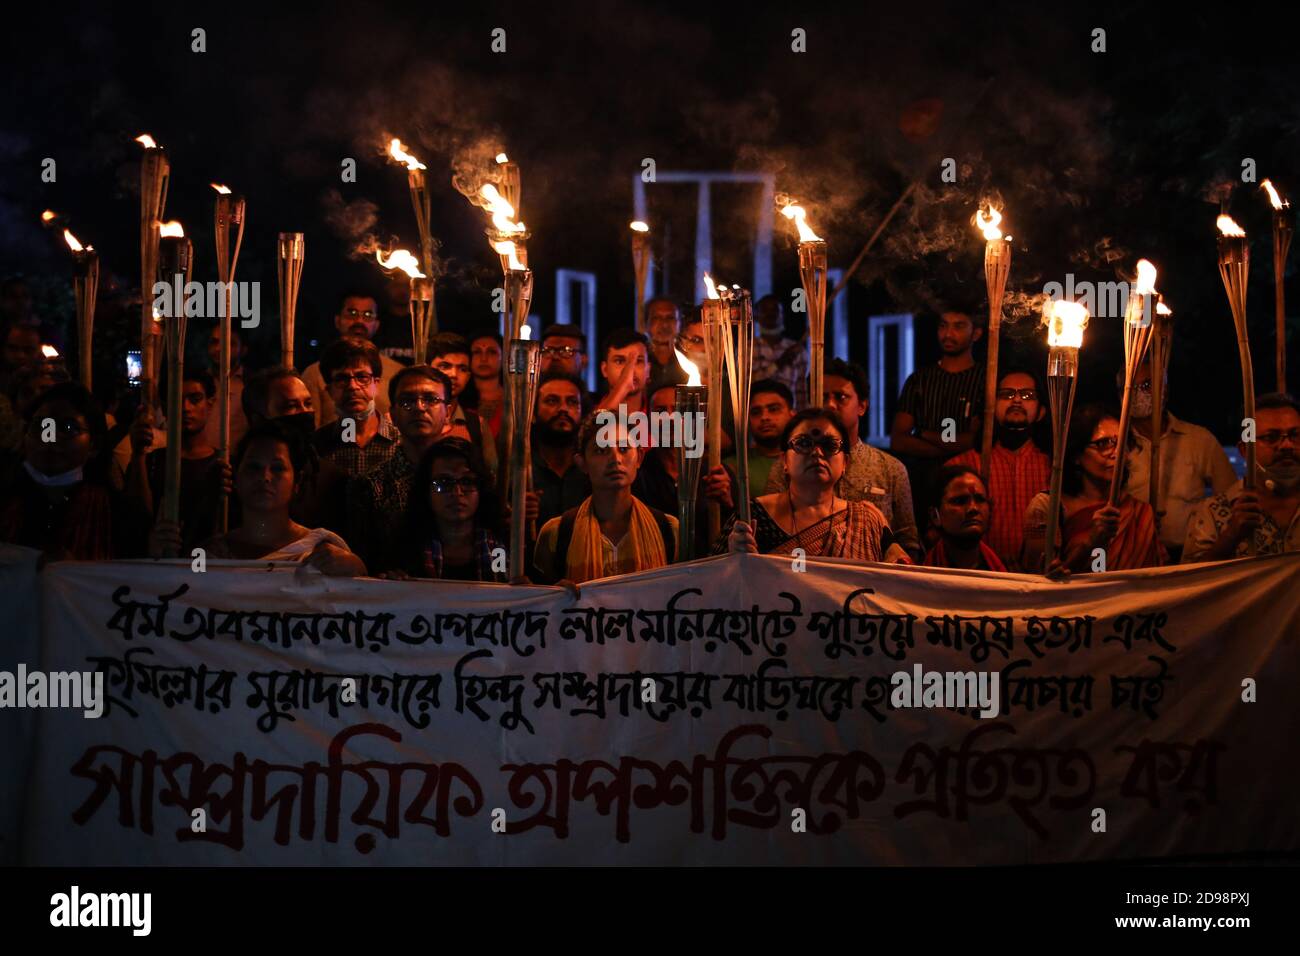 Dhaka, Dhaka, Bangladesh. 3rd Nov, 2020. Progressive organizations have taken out torch procession demanding justice for the burning of people in Lalmonirhat and the attack on the houses of the Hindu community in Muradnagar, Comilla, on charges of insulting religion during the COVID-19 pandemic on 3rd November, 2020. Credit: Md. Rakibul Hasan/ZUMA Wire/Alamy Live News Stock Photo